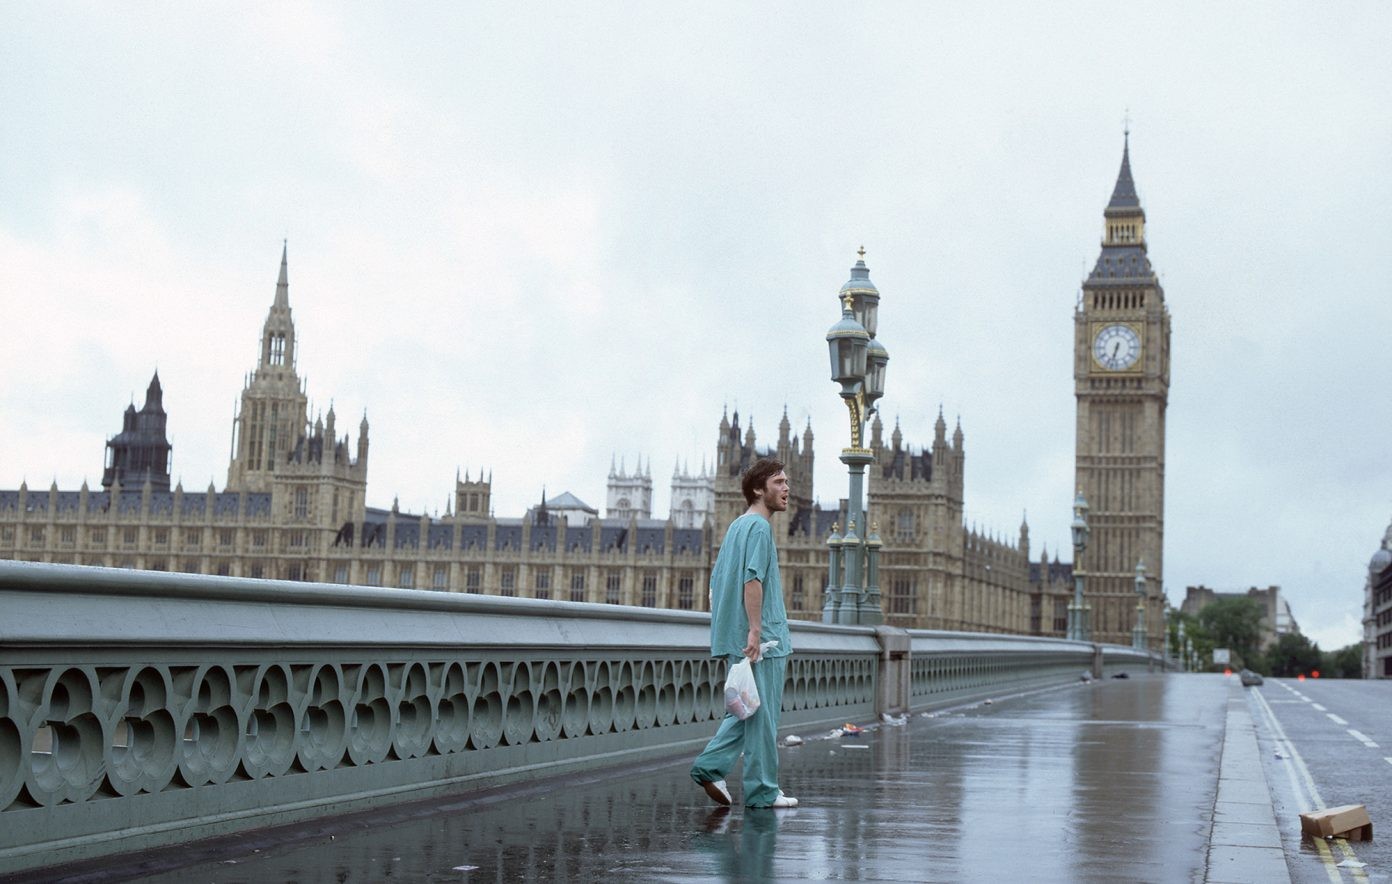 A Still from 28 Days Later